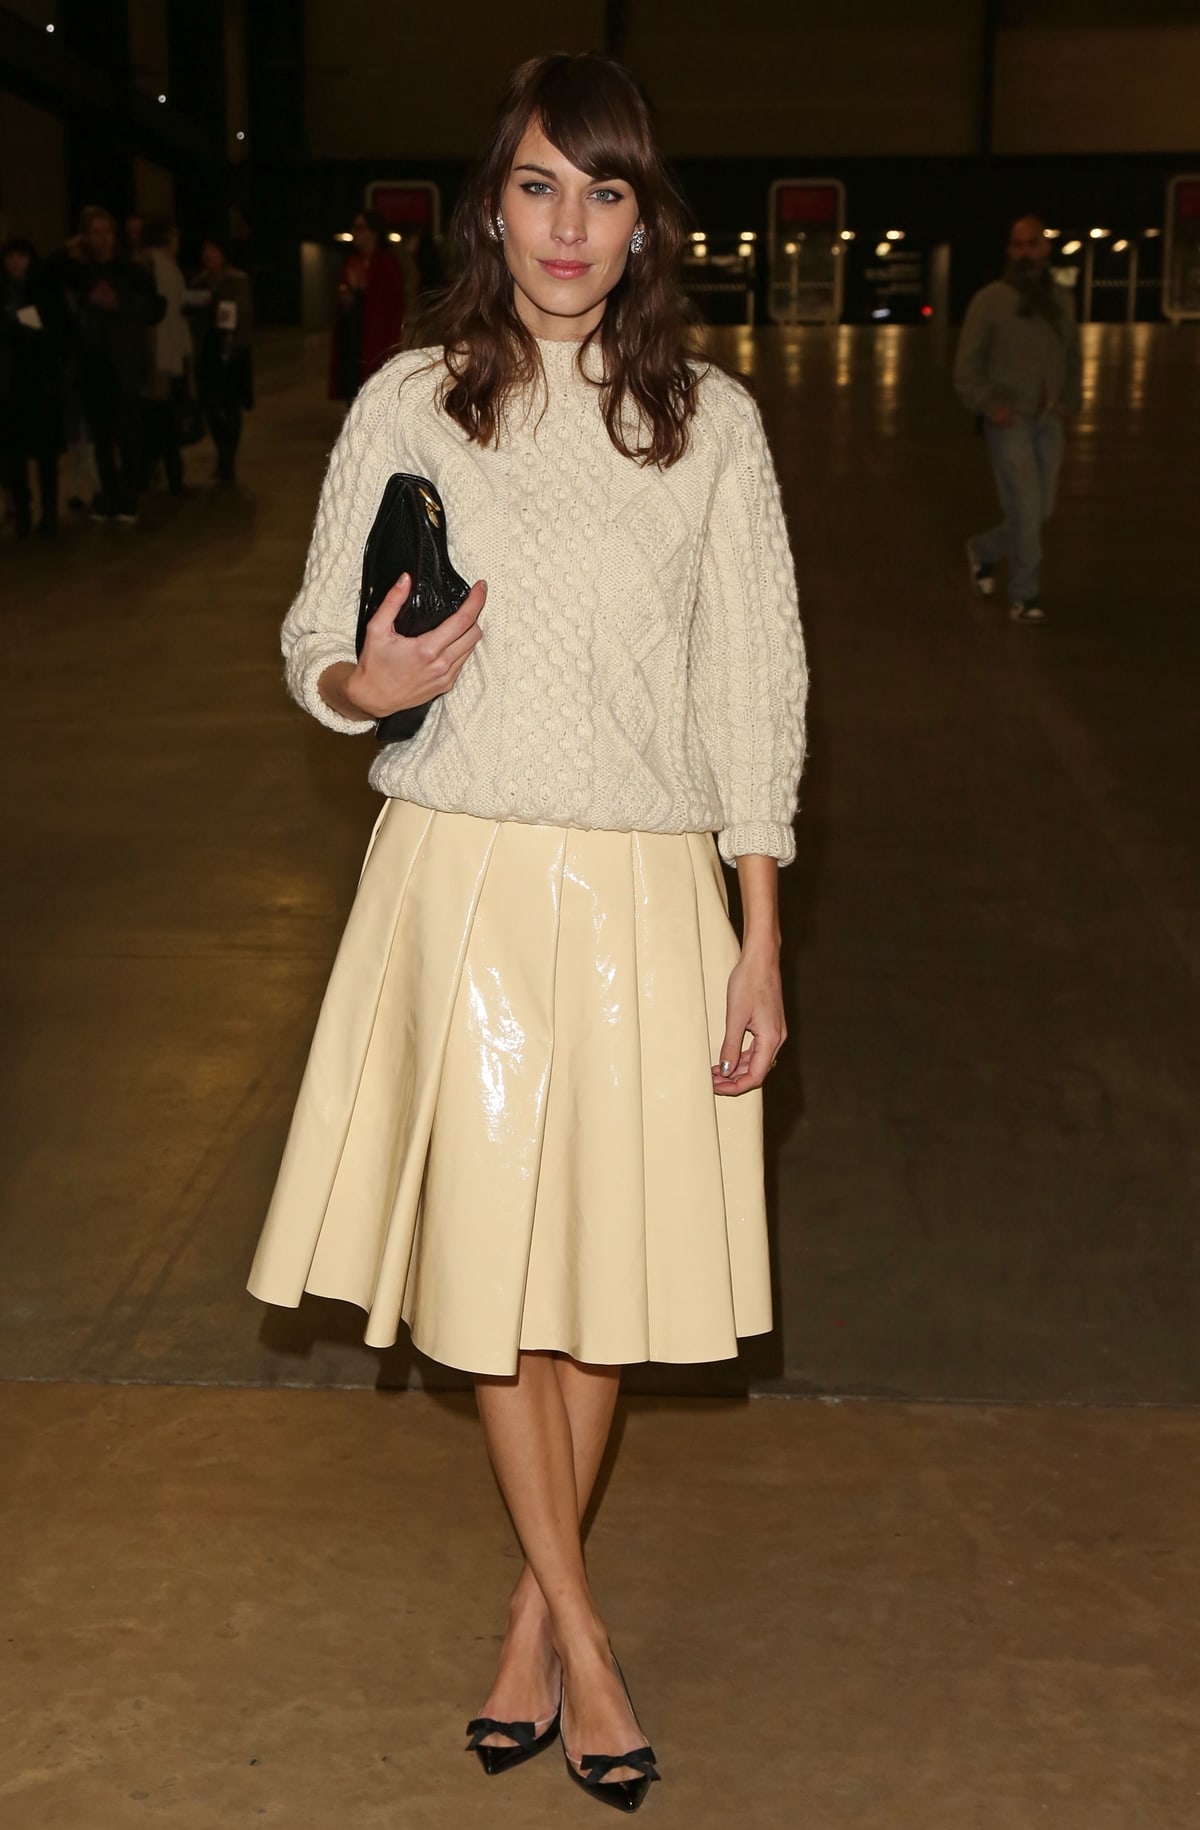 Alexa Chung attends the J.W. Anderson show during London Fashion Week Fall/Winter 2013/14 at TopShop Show Space